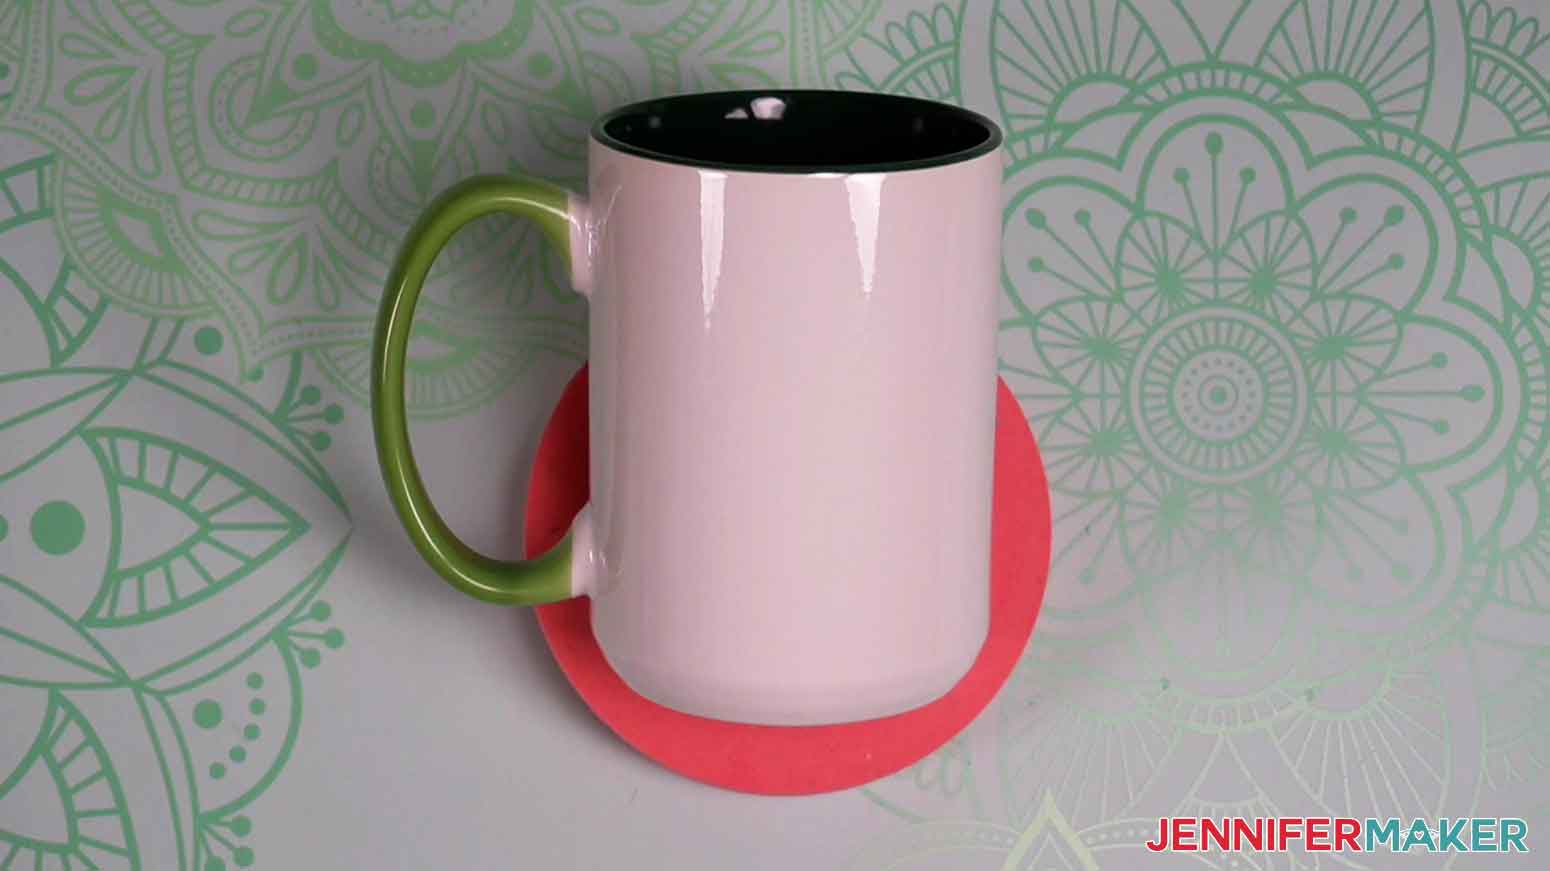 Use a roll of painter's tape to stabilize the mug for vinyl placement.